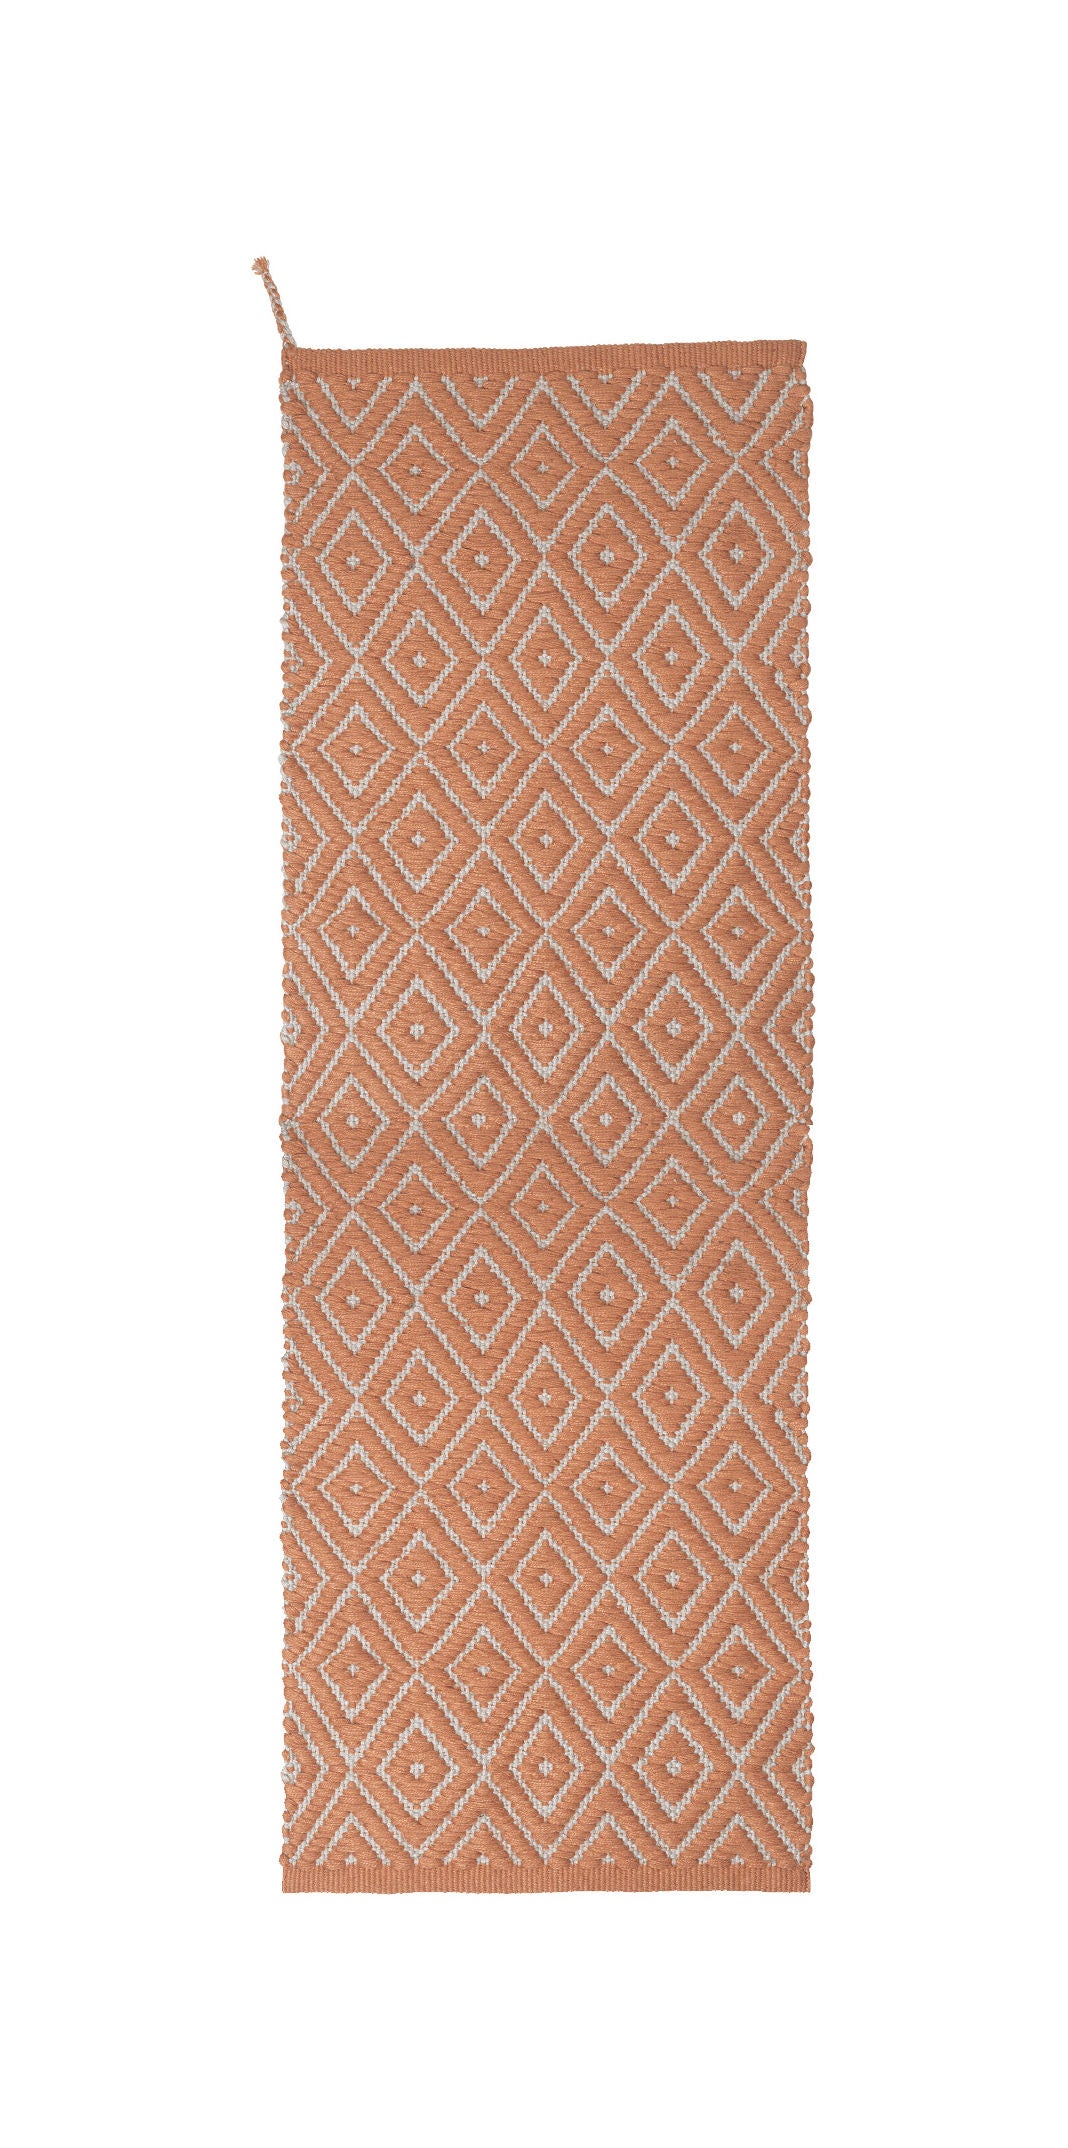 Cozy Living Upcycled PVC woven rug In/out door - TERRACOTTA - L